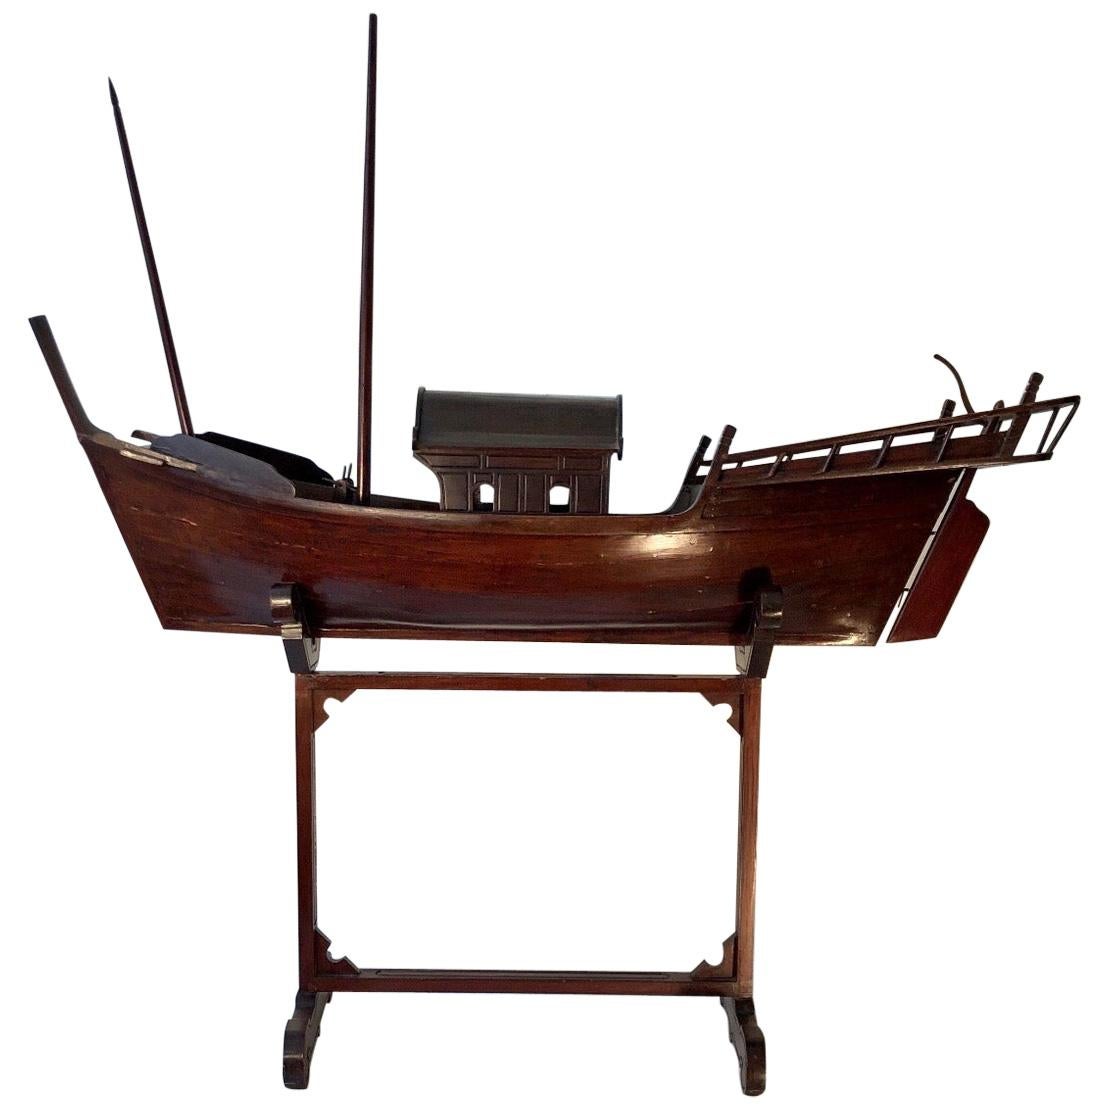 Chinese  Junk / Ship Model On Stand, Early 20th Century